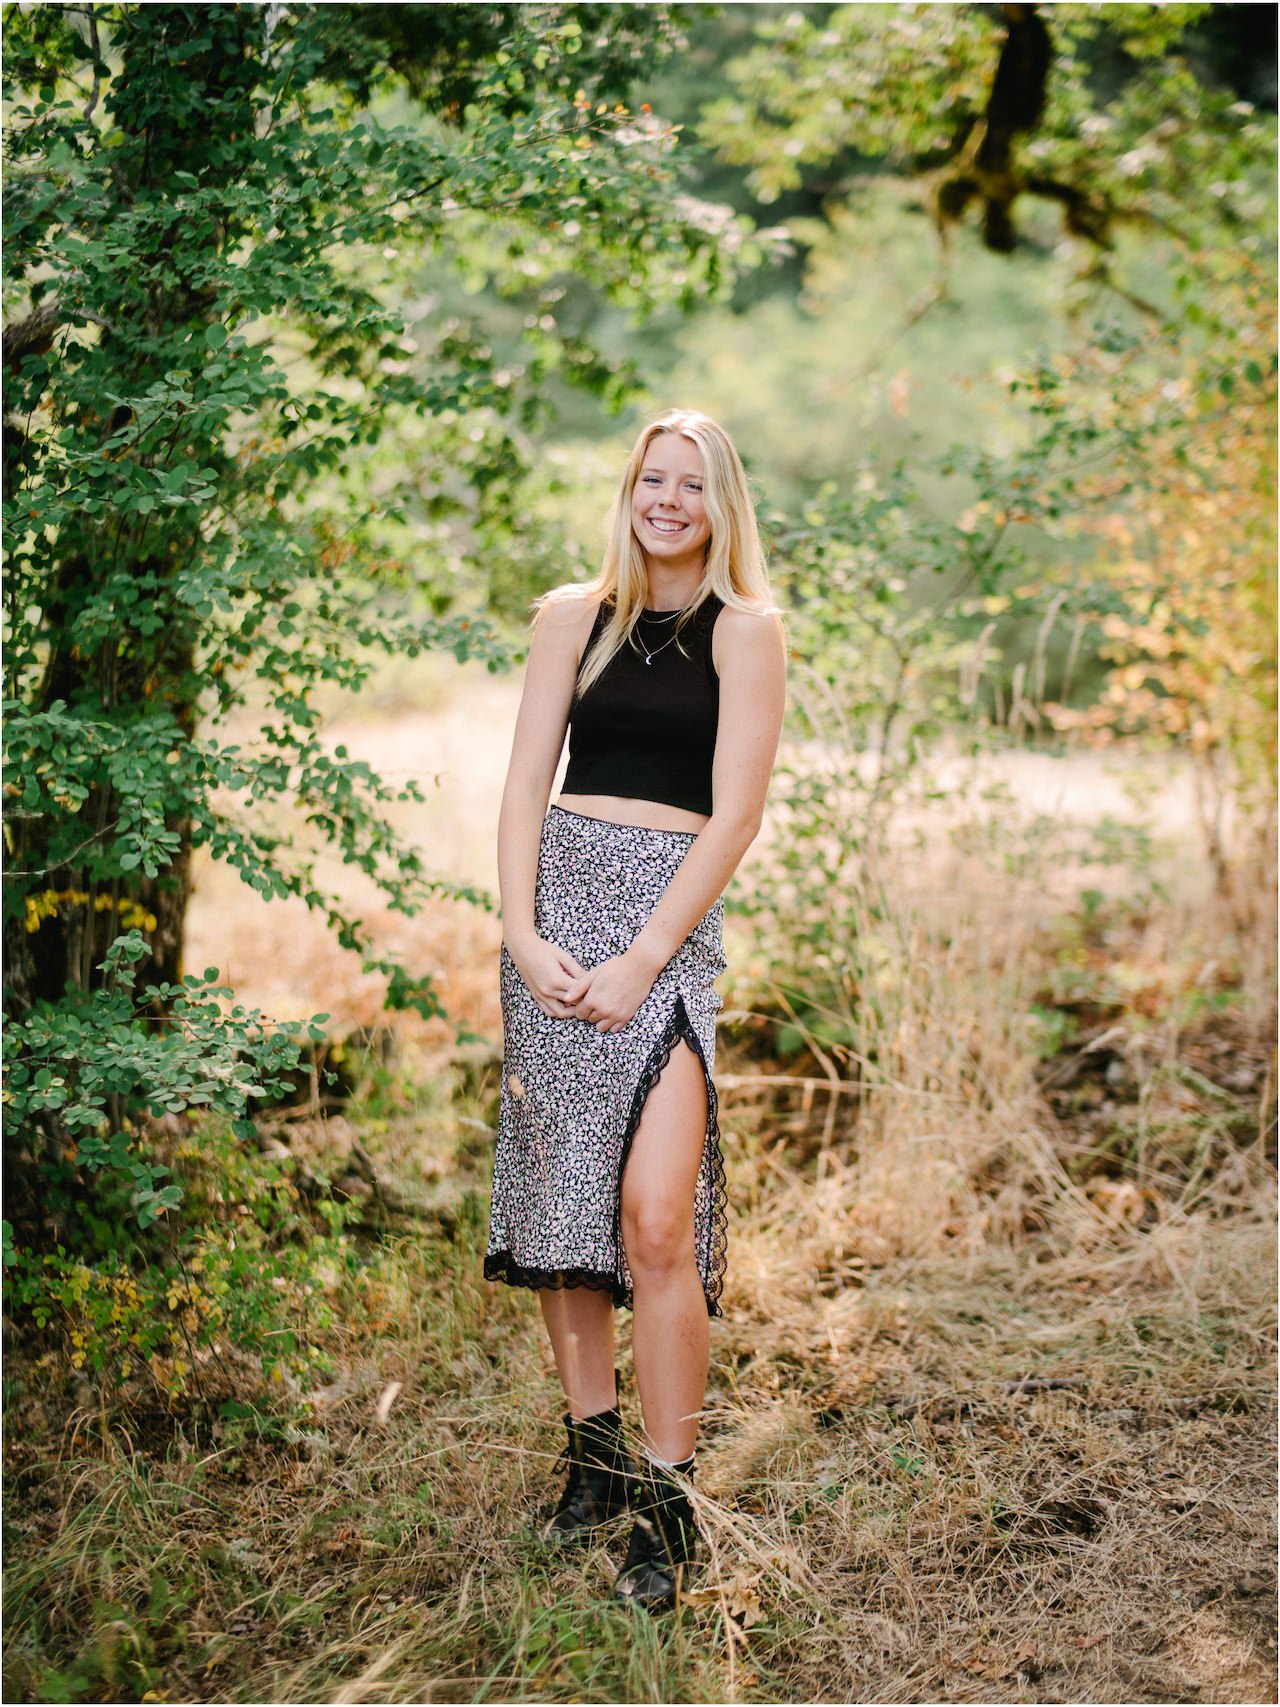  Smiling blonde senior girl in black tank top and dress with slit laughing in oak tree grove 